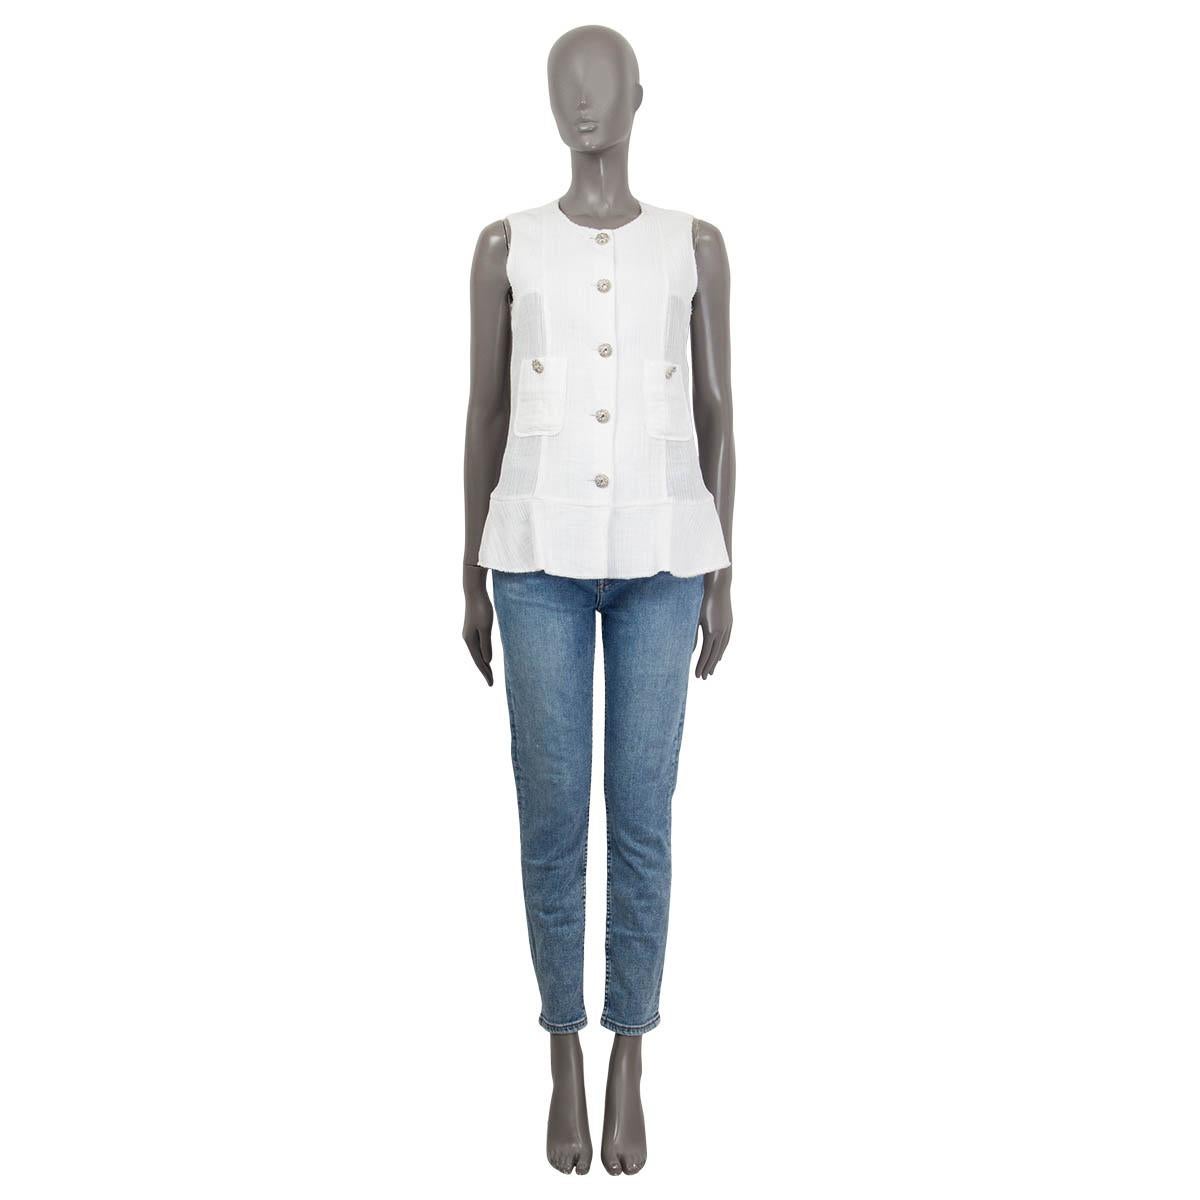 100% authentic Chanel 2012 sleeveless blouse in off-white cotton (48%), rayon (32%) and nylon (20%). Features two buttoned patch pockets on the front and a flared hemline. Opens with five buttons on the front. Unlined. Has been worn and is in